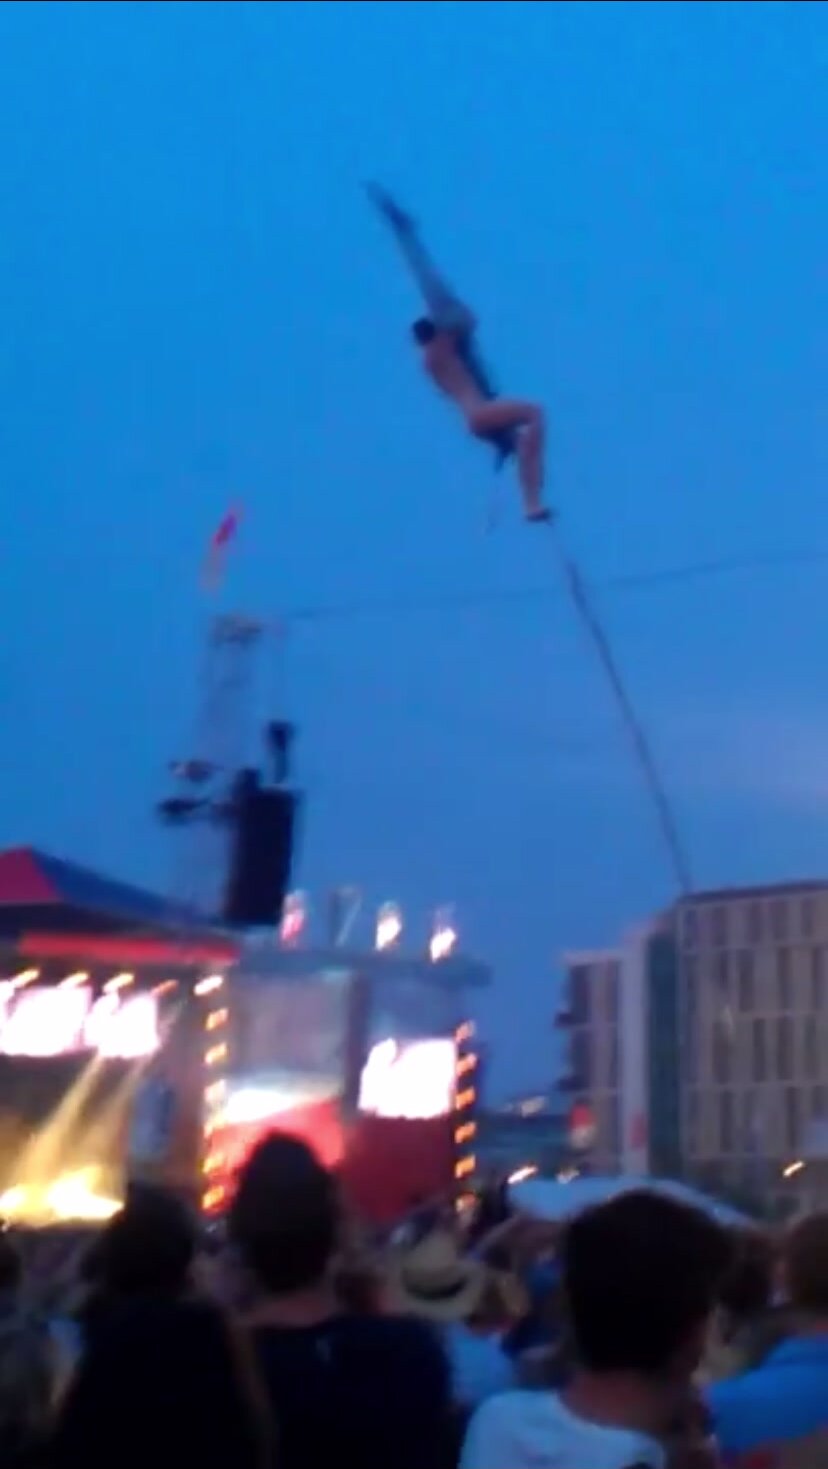 Naked man climbs pole for cheering crowd